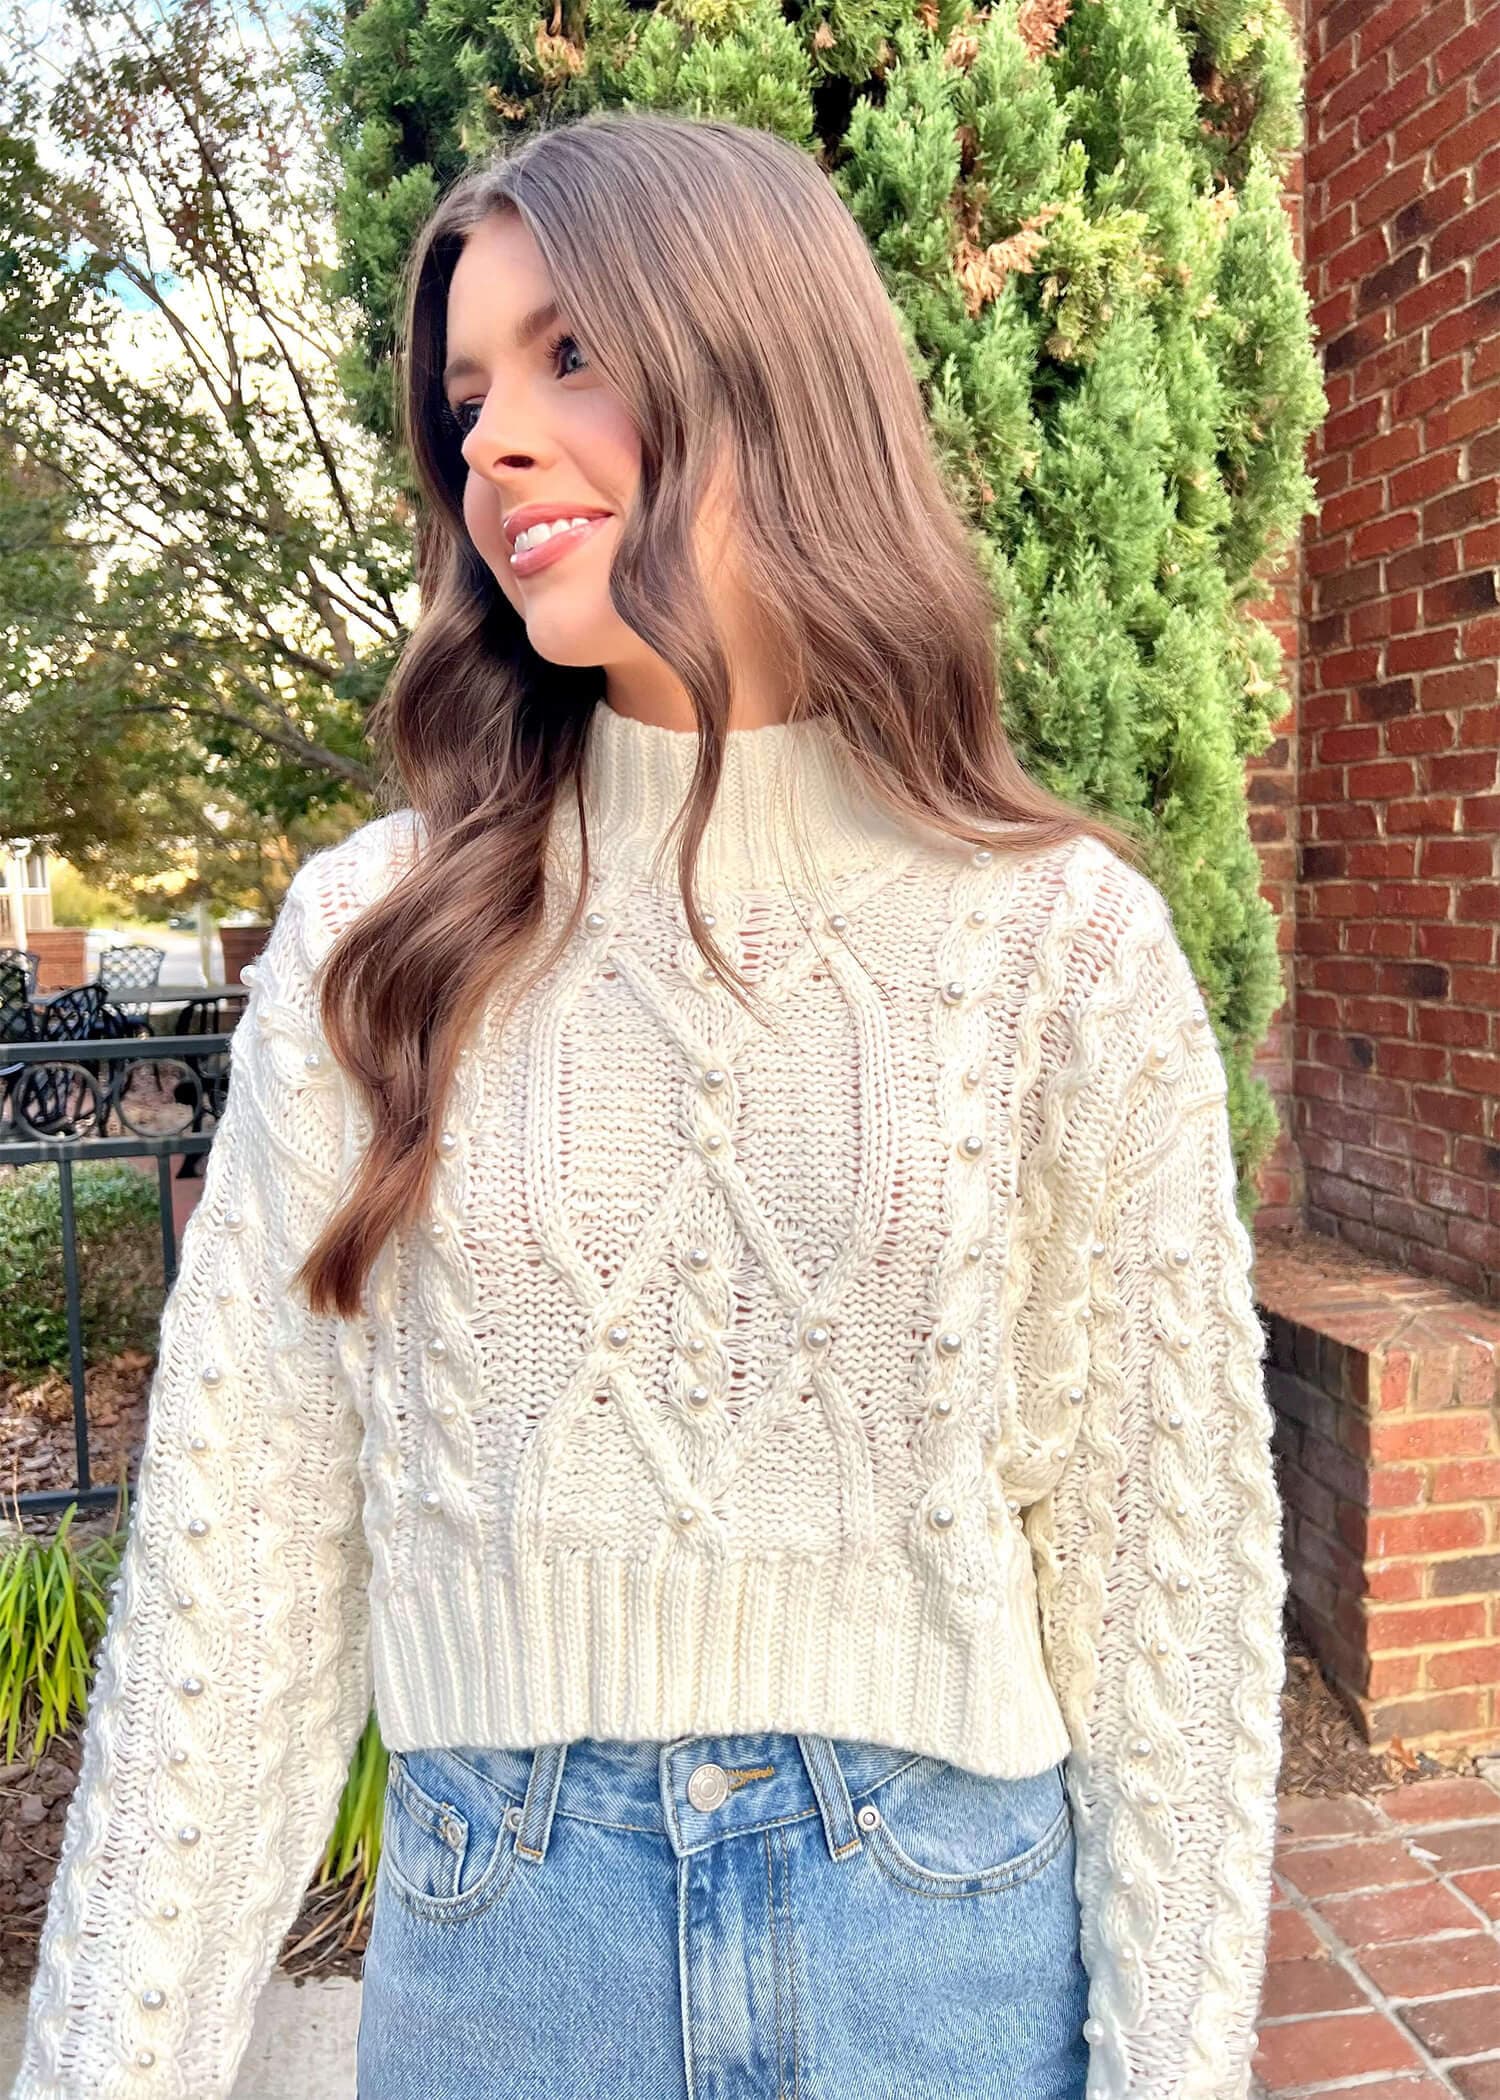 Keep It Going Sweater - Ivory Sweater MerciGrace Boutique.